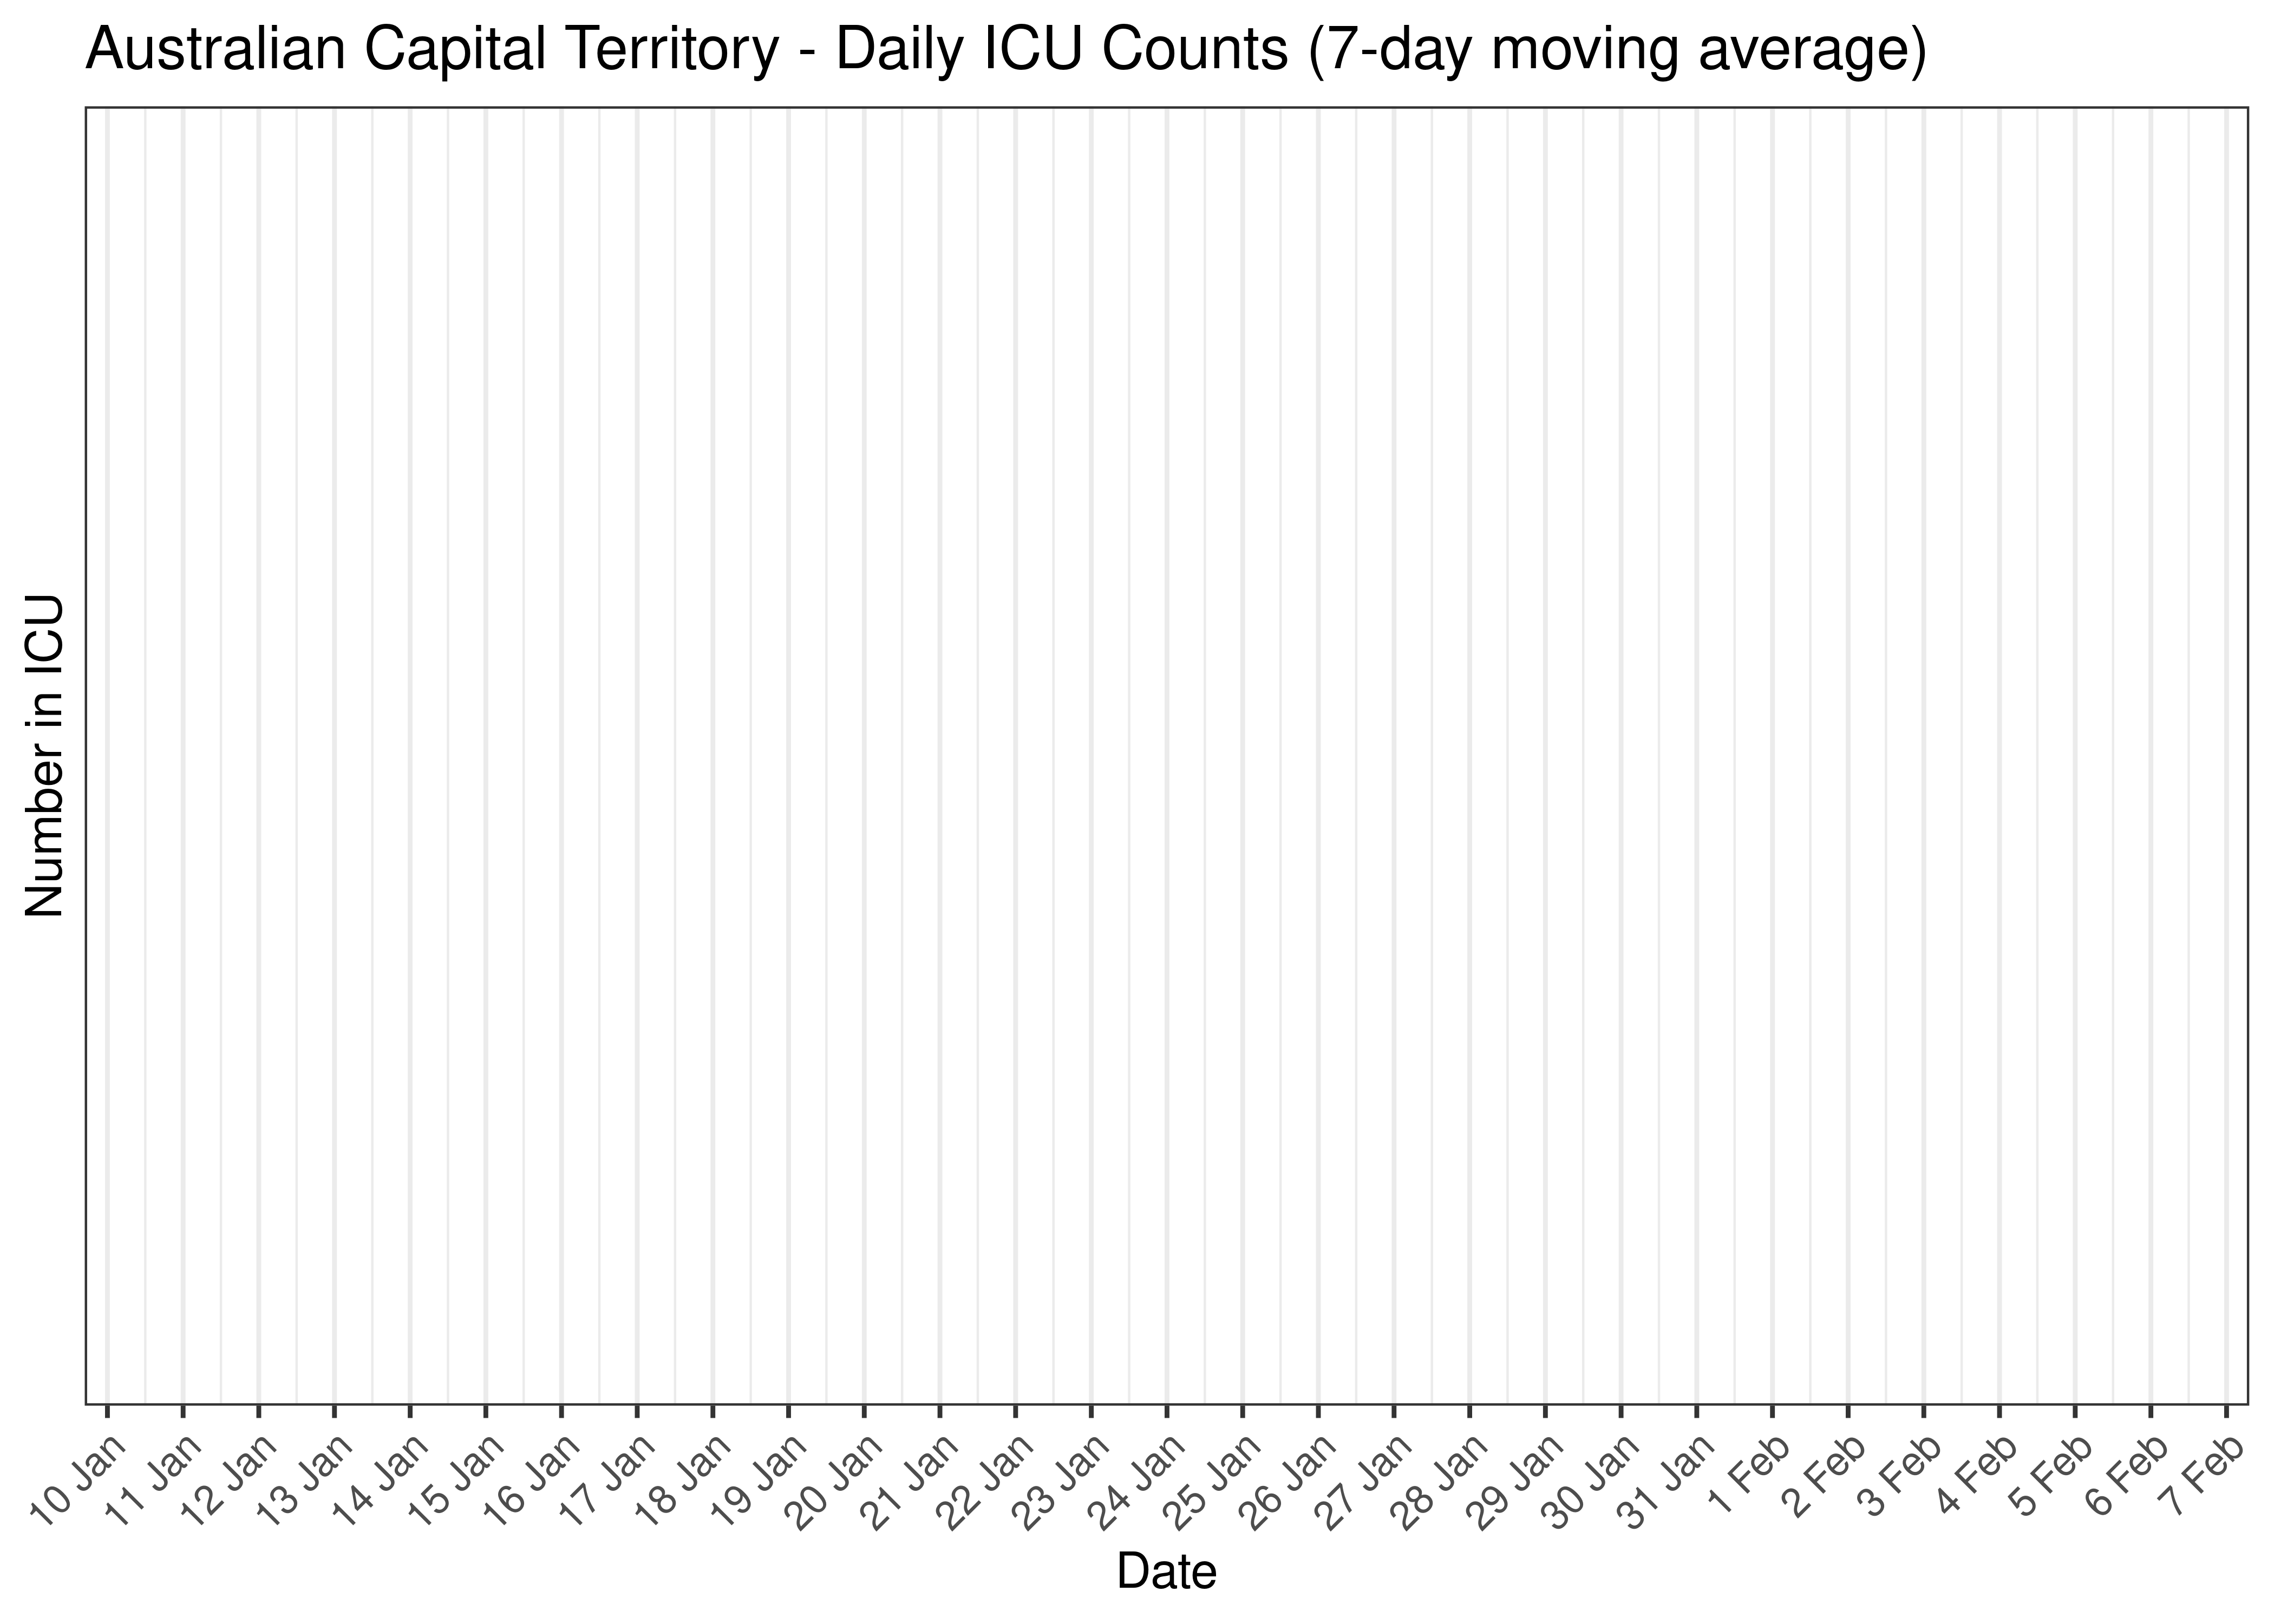 Australian Capital Territory - Daily ICU Counts for Last 30-days (7-day moving average)